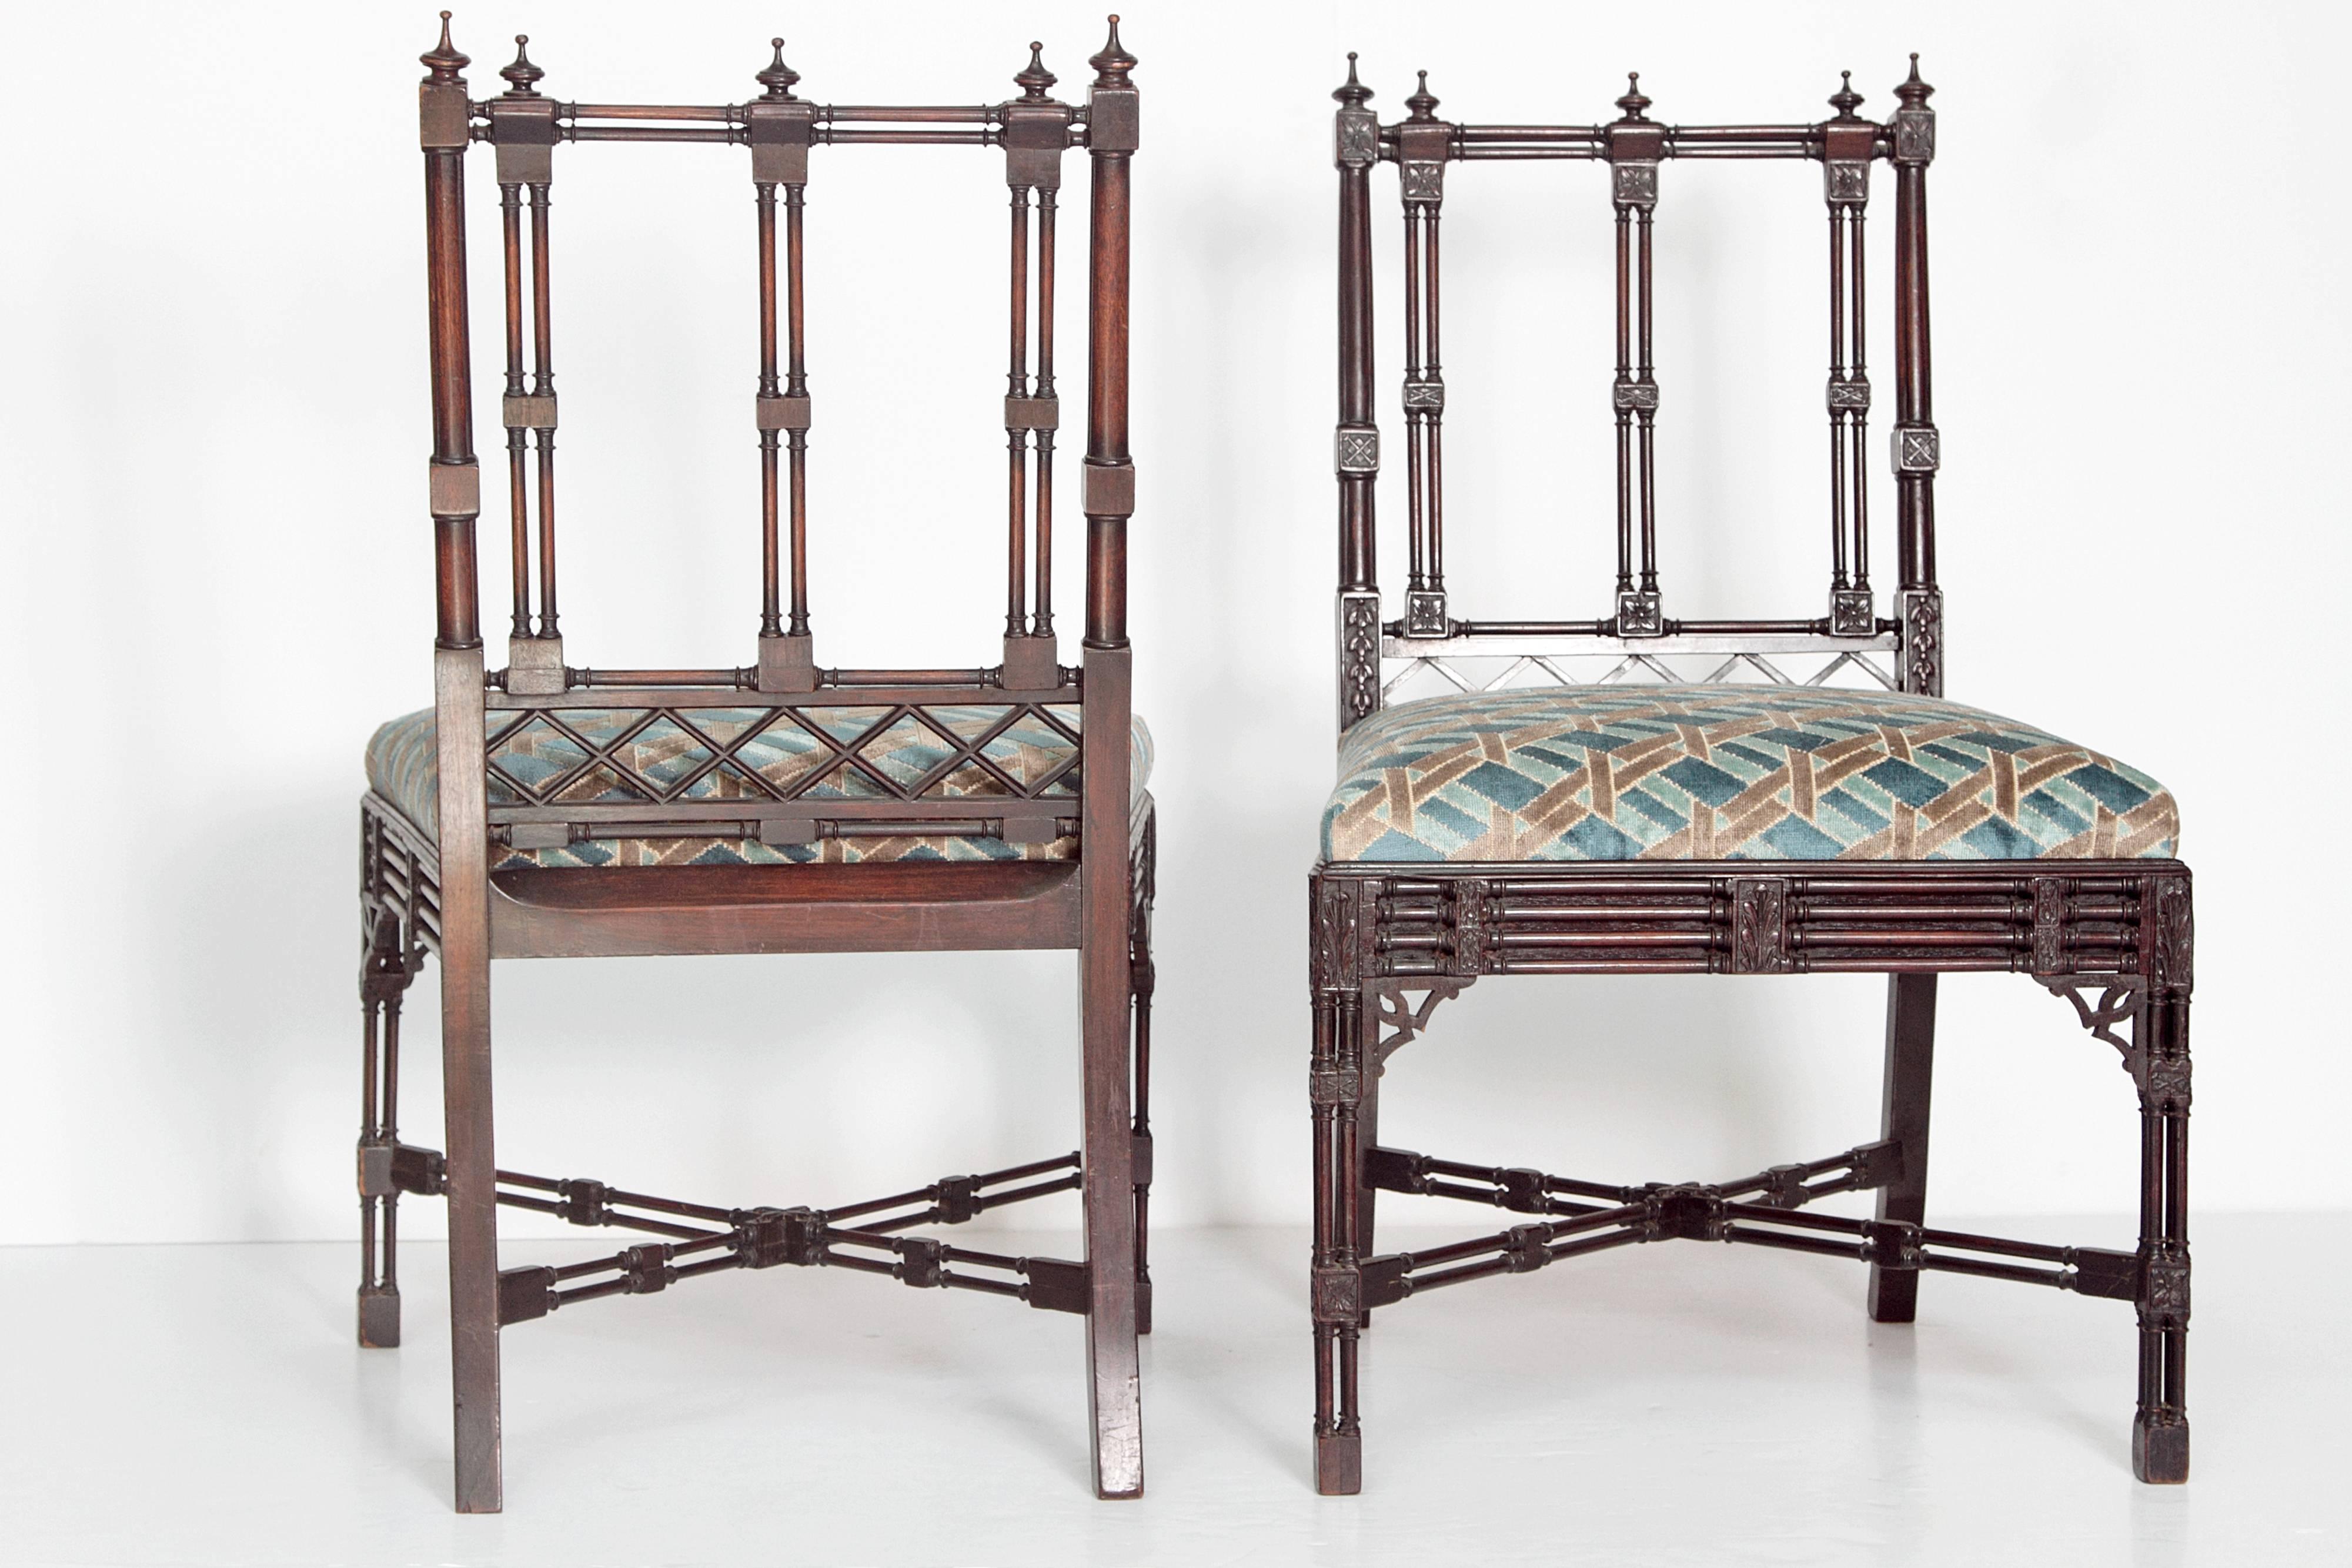 Carved Group of Georgian Revival Chinese Chippendale Style Chairs